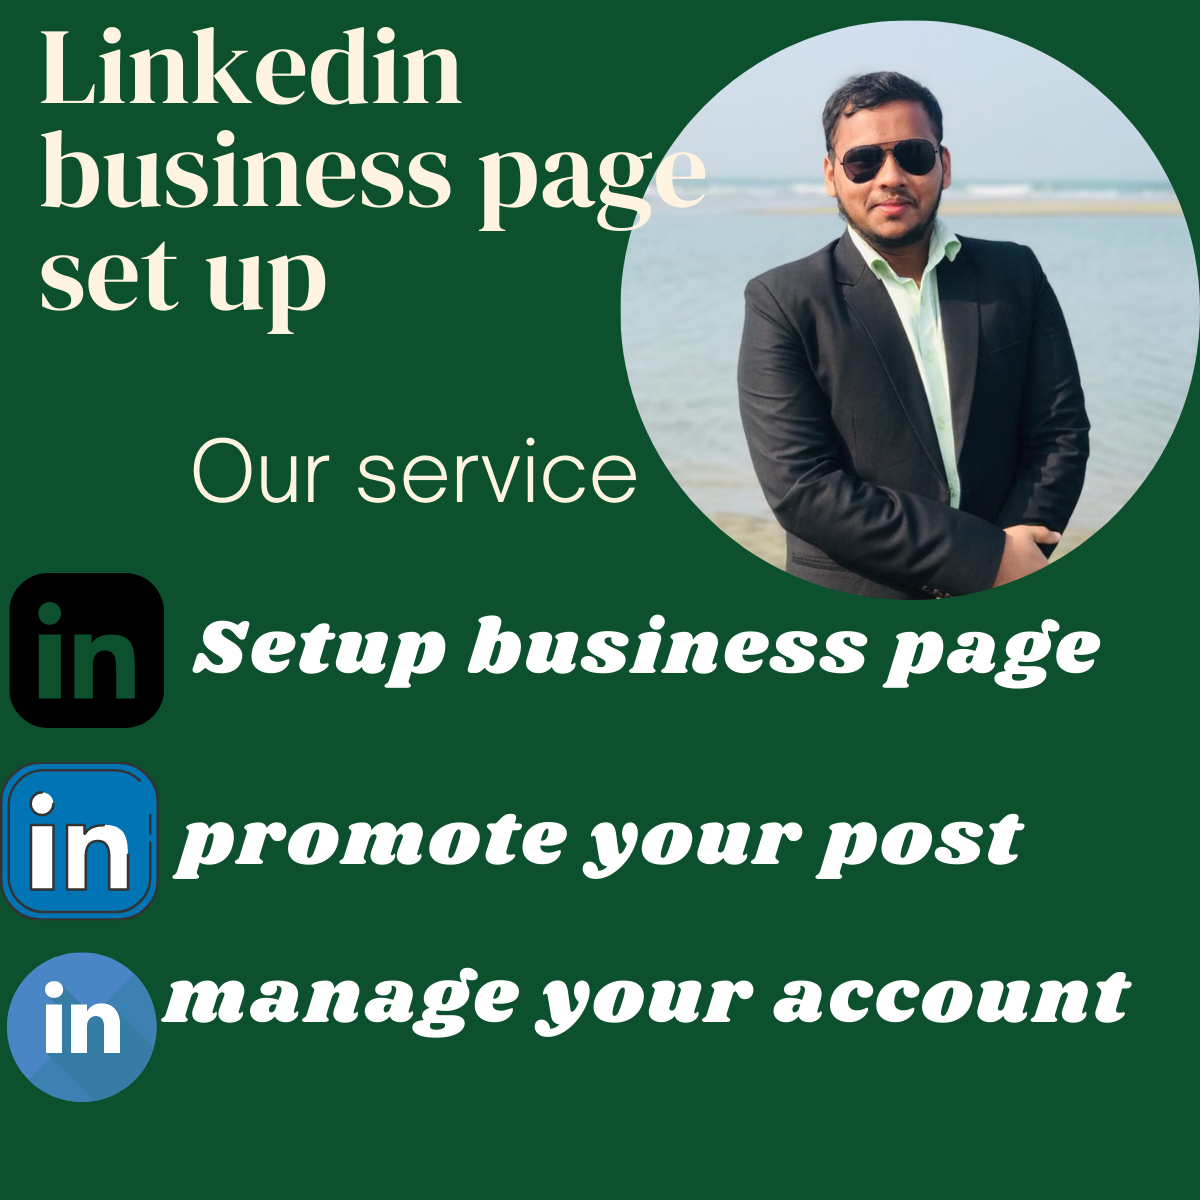 I will profitably promote on linkedin ,increase followers and manage